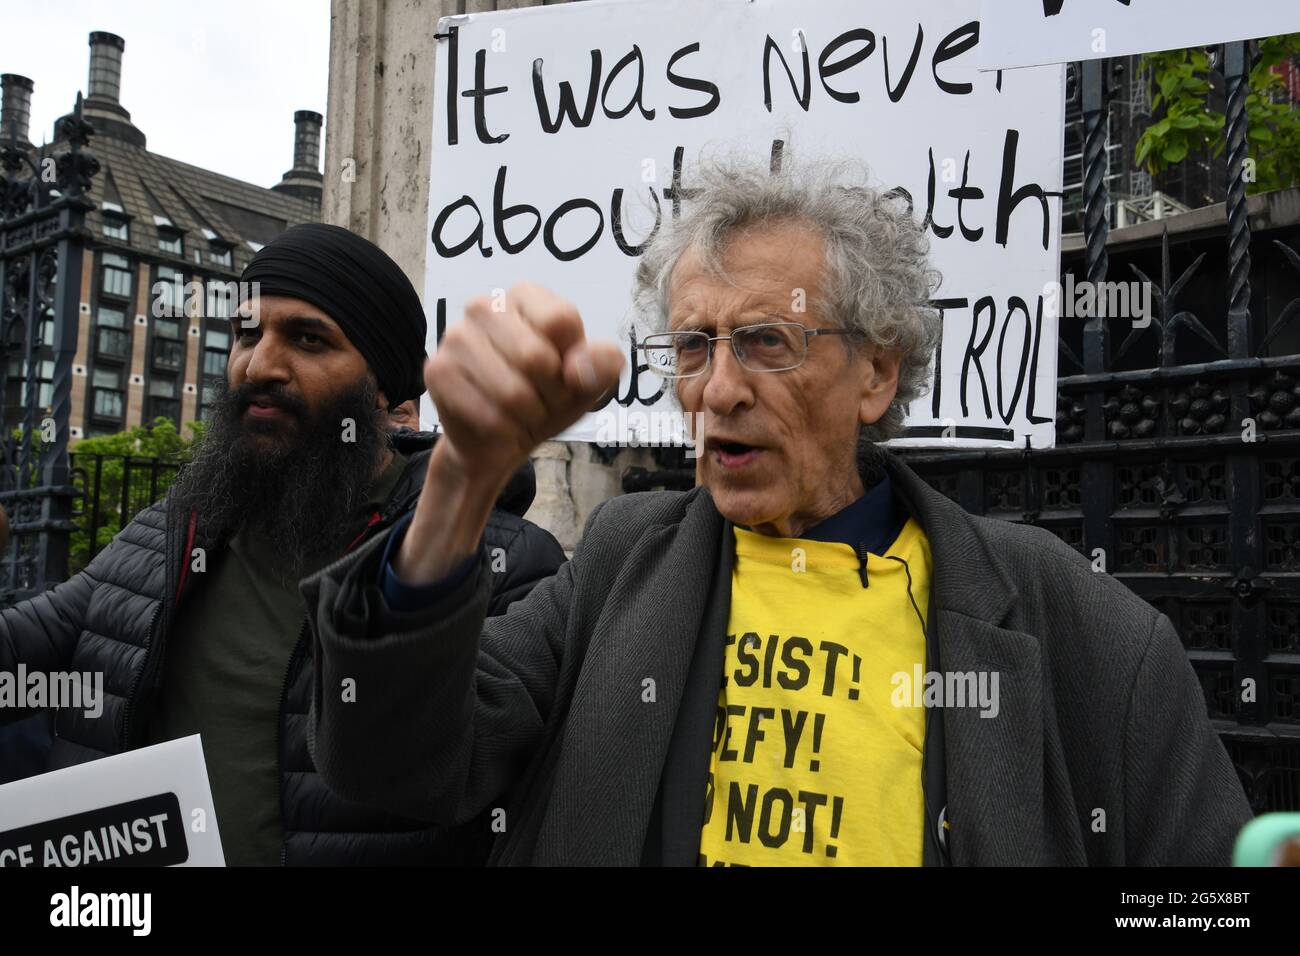 On 30 June 2021, Speaker Piers Corbyn is the organise of Resist, Defy, Do NOT Comply! - No More Lockdowns protest NoVaccinePassport of the anti-vaccine and anti-lockdown, claimed the British government was corrupt in order to control the freedom of British citizens at Parliament Square, London, UK. Stock Photo